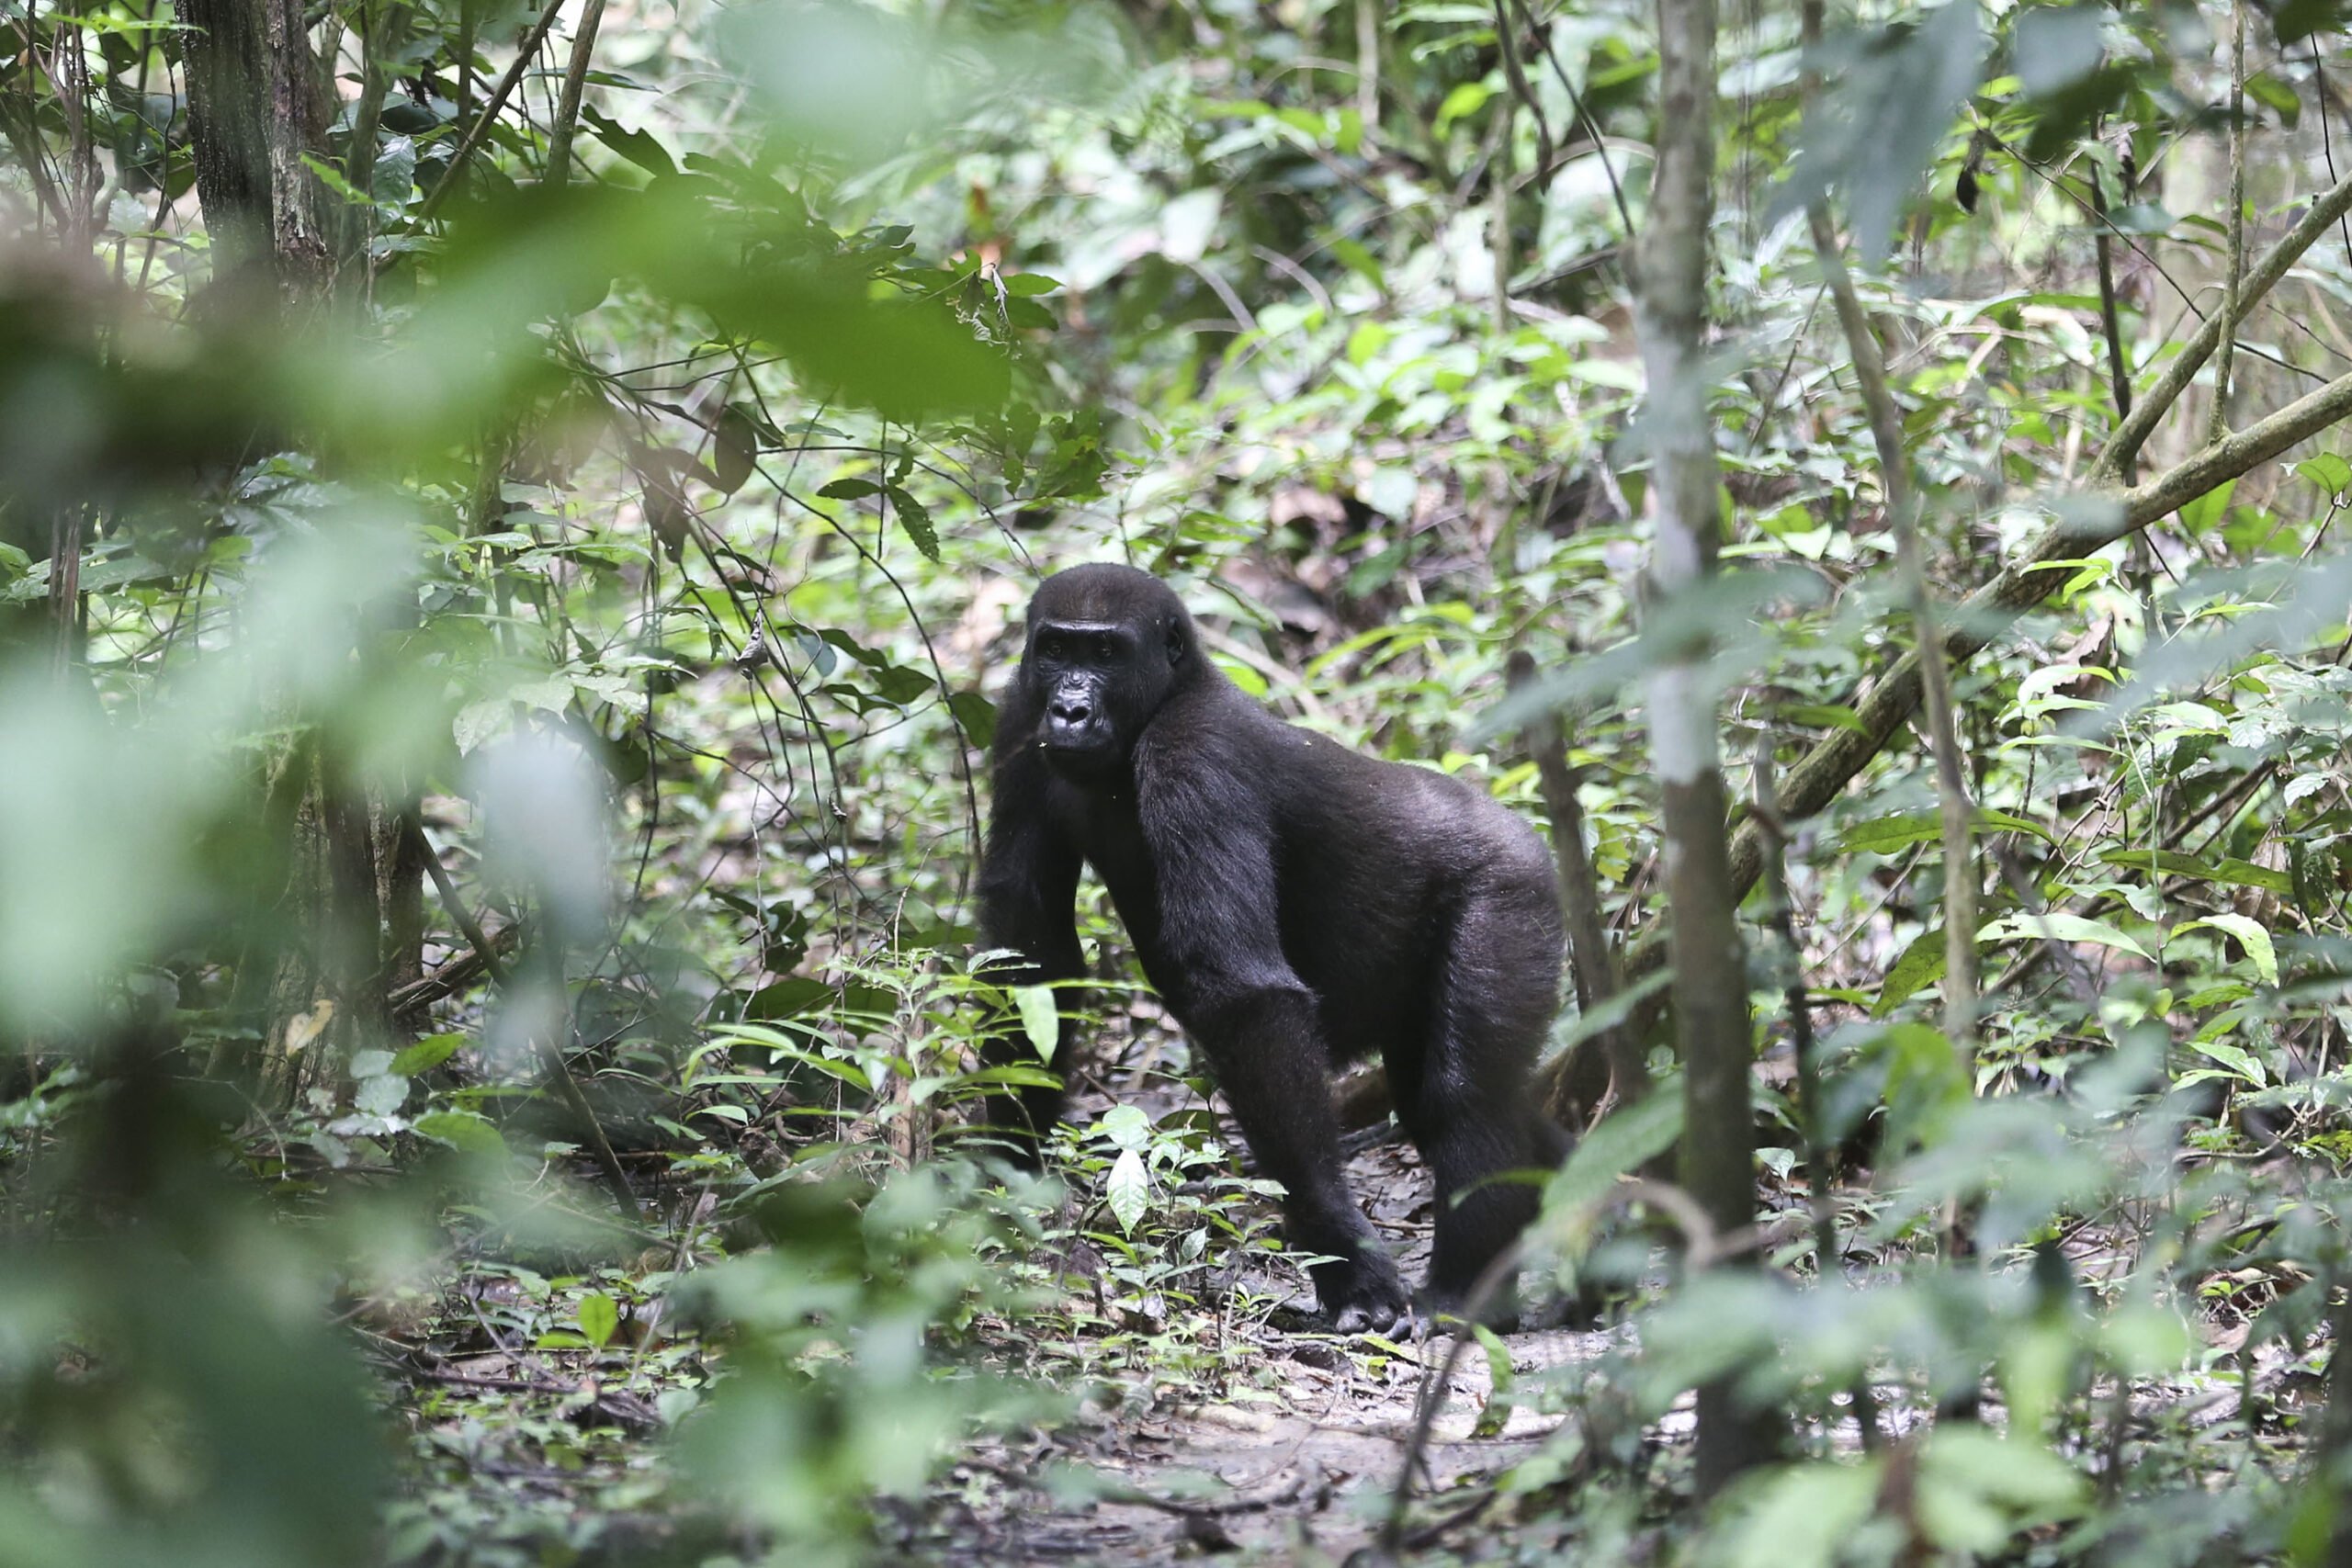 In Gabon you can observe western gorillas and help protect them from poaching